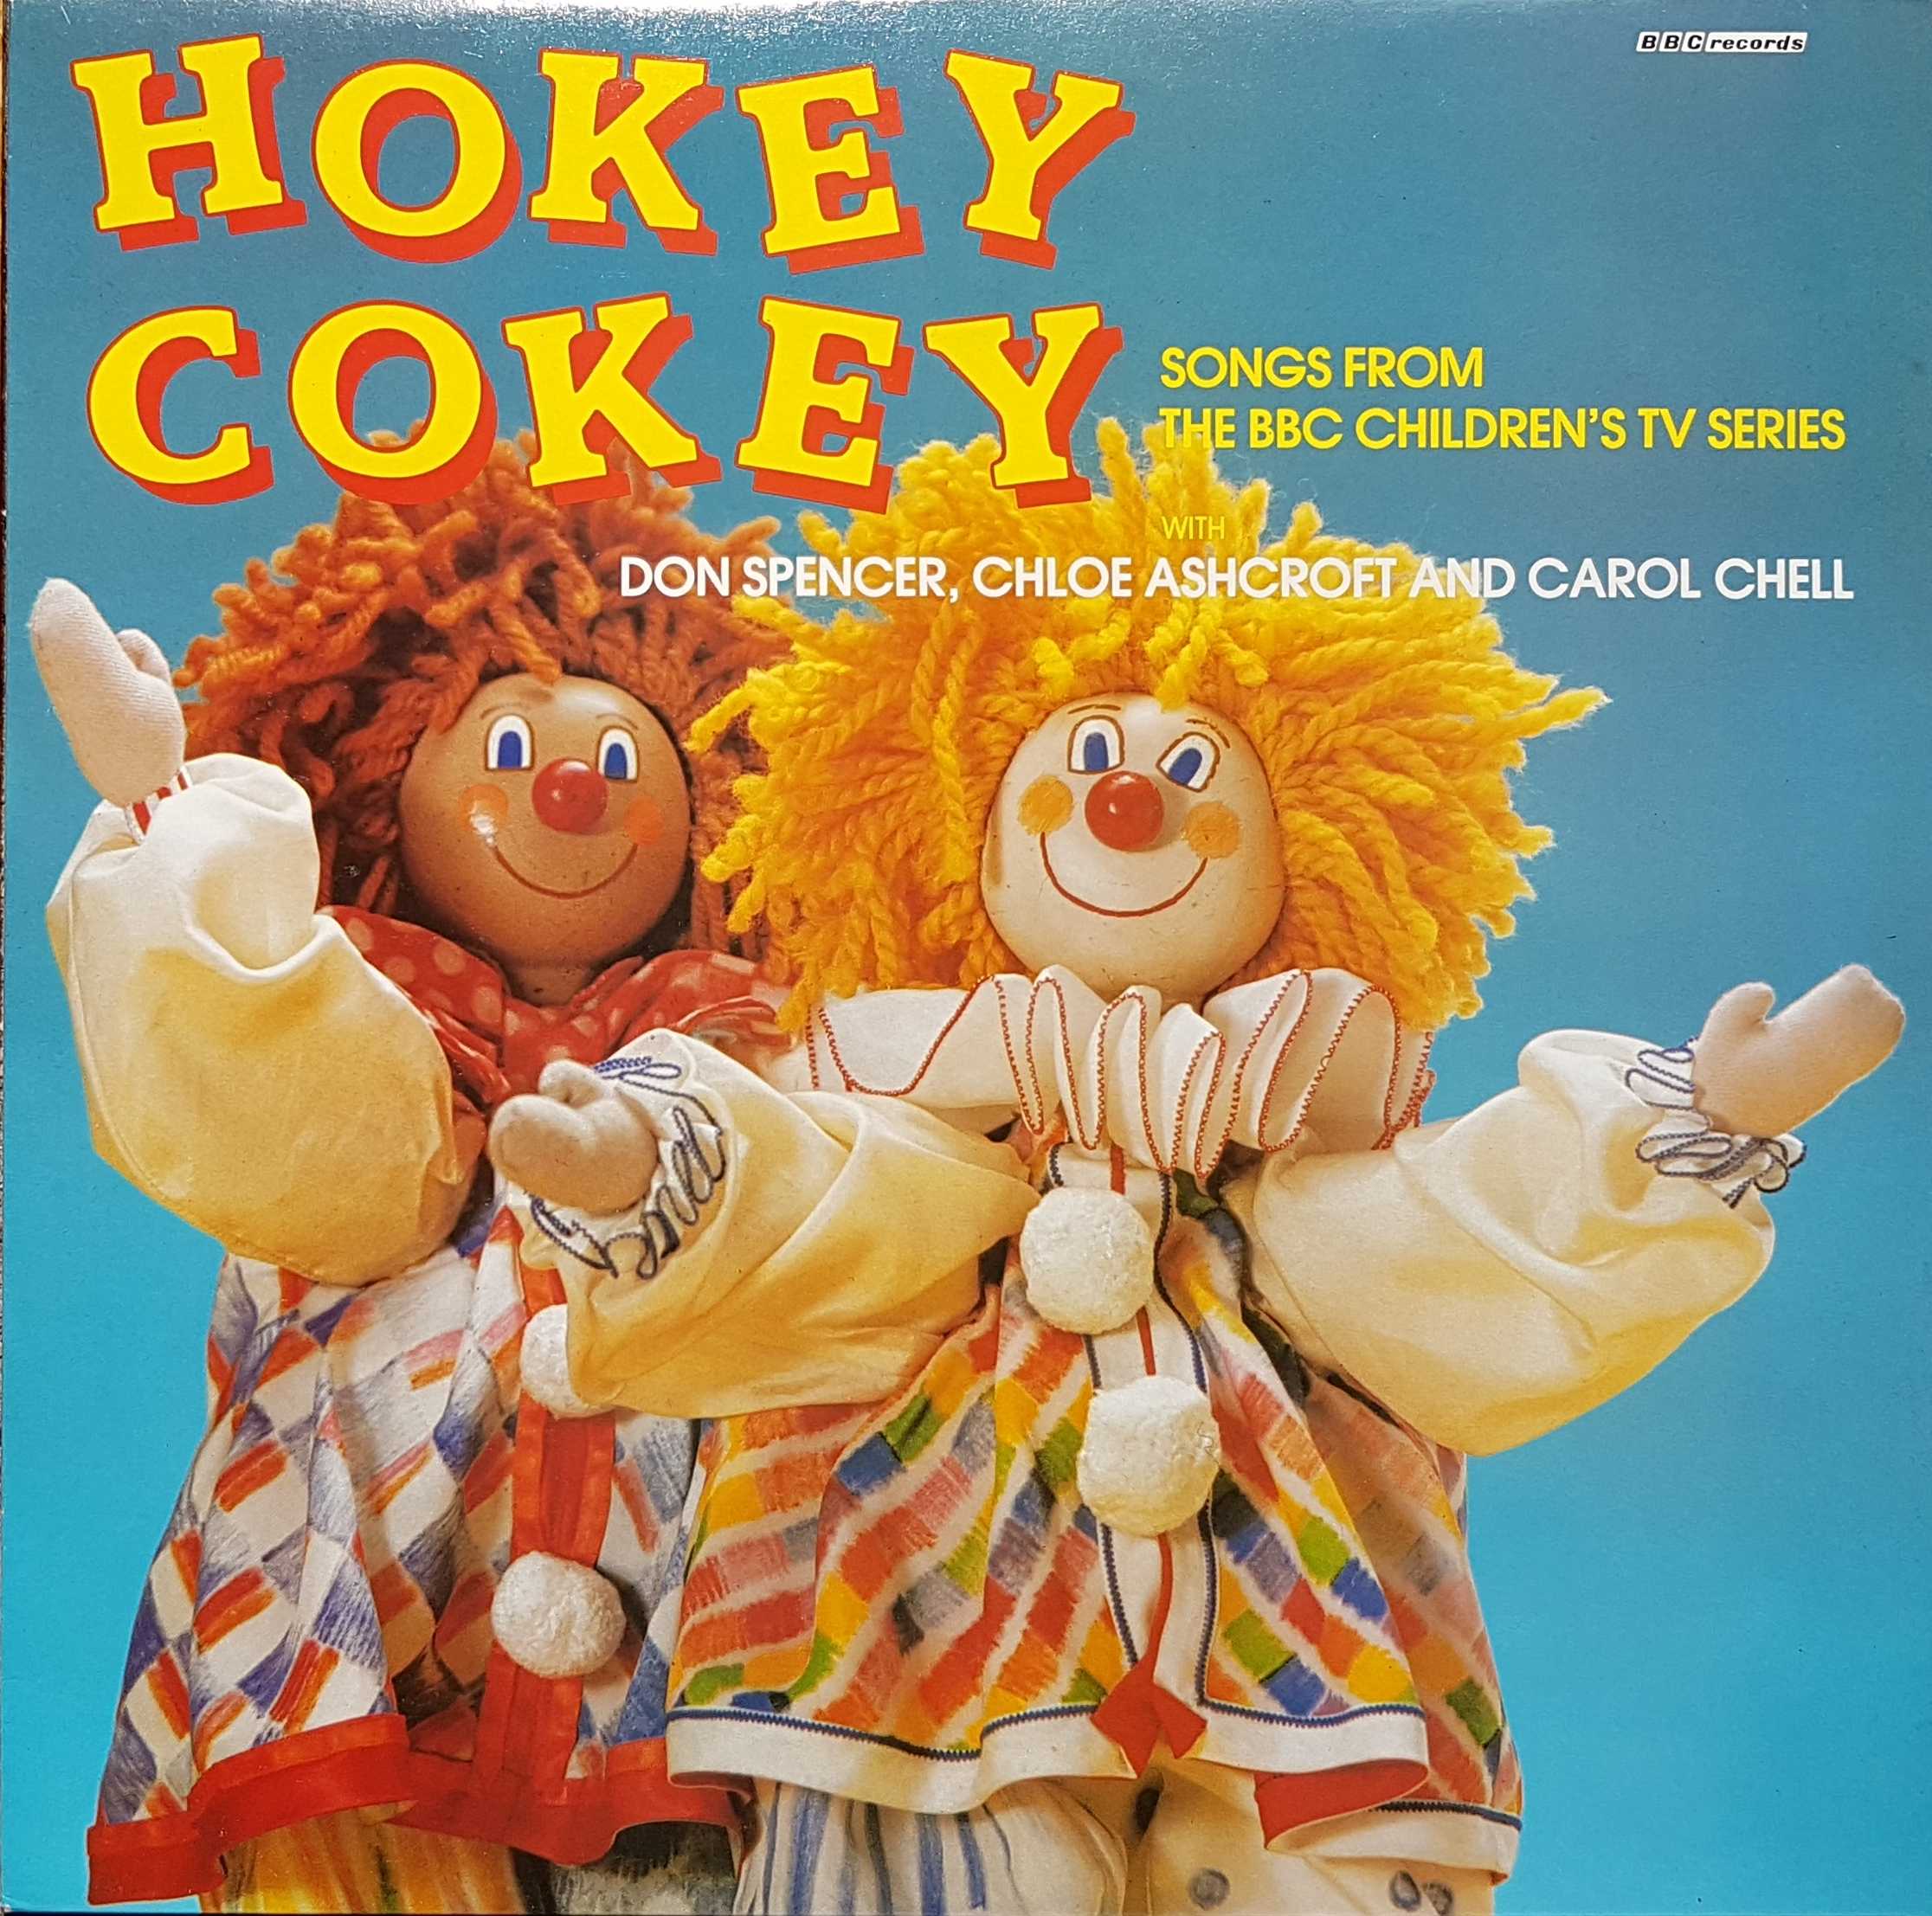 Picture of REC 557 Hokey Cokey by artist Various from the BBC albums - Records and Tapes library